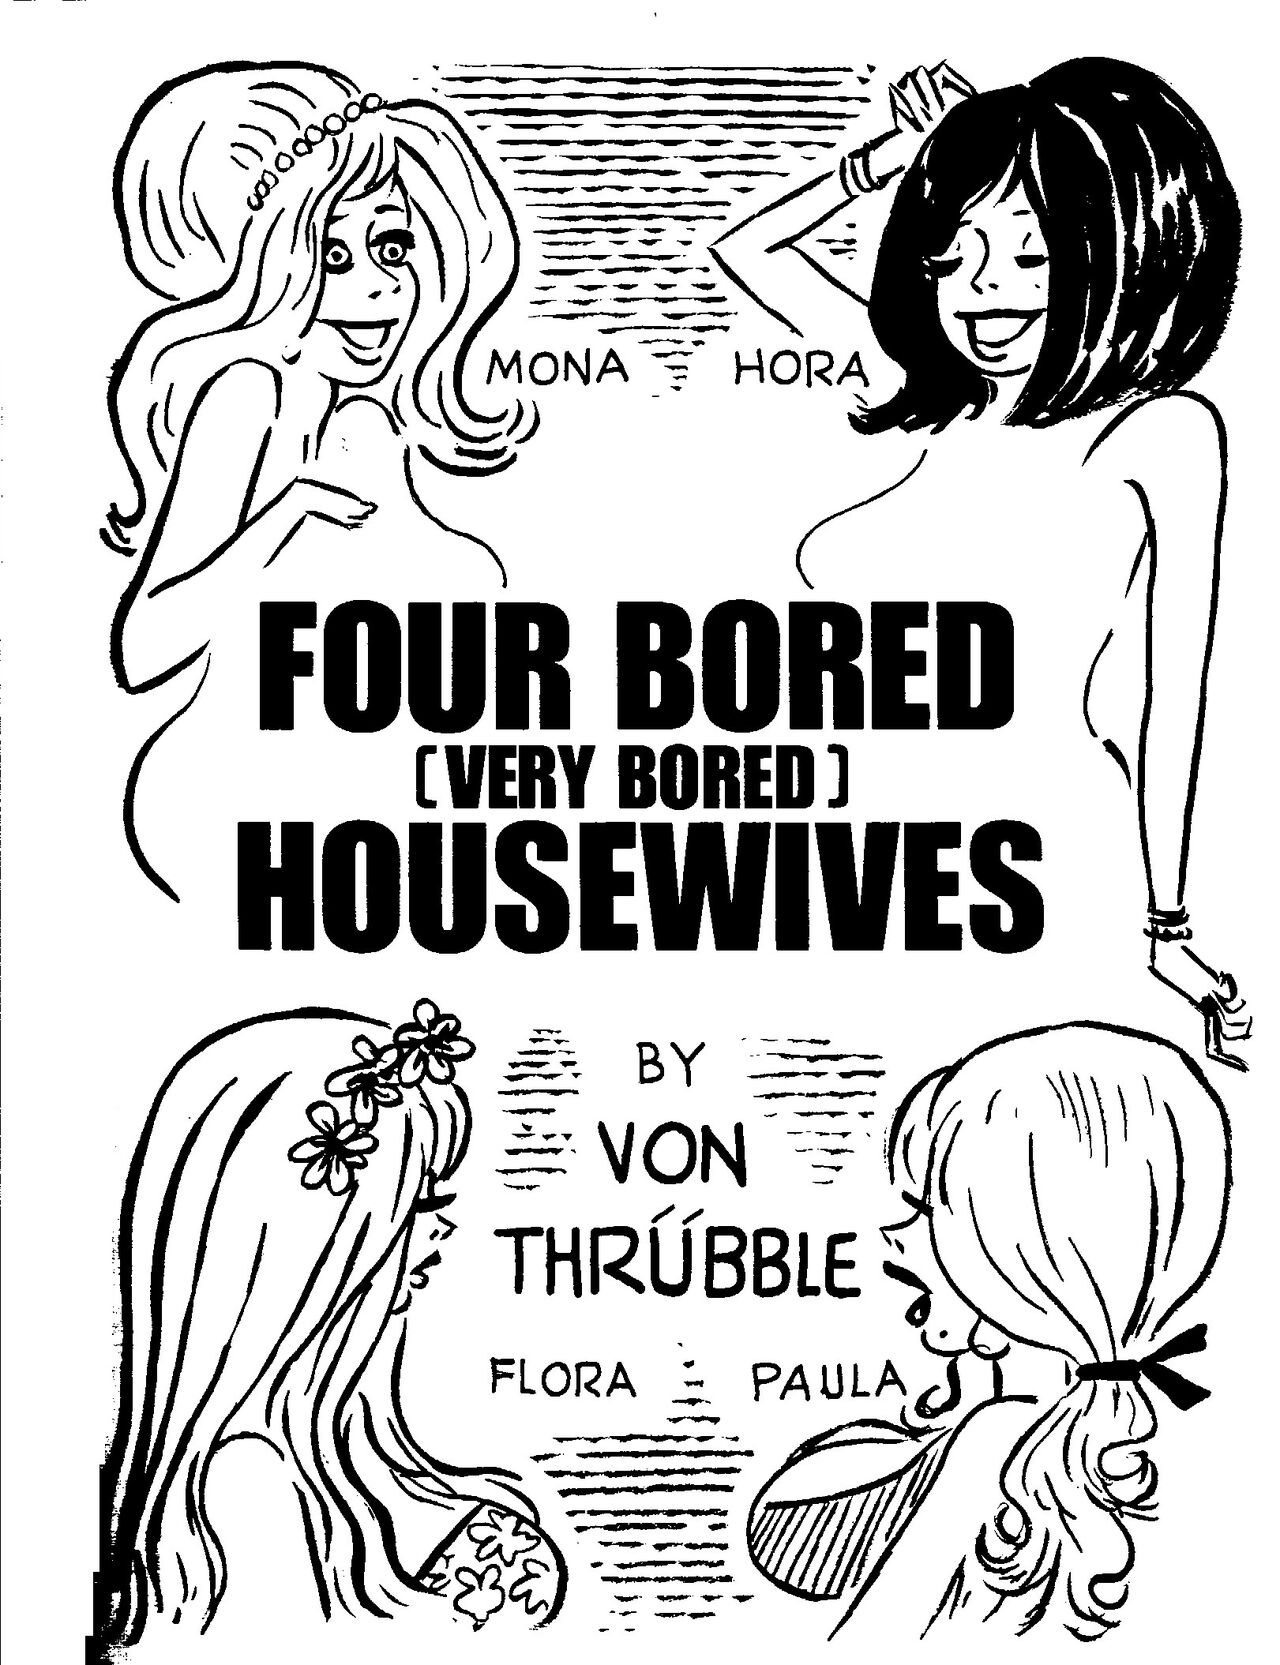 Four Bored Very Bored HouseWives (Art Hurric / Von Thrubble) 2